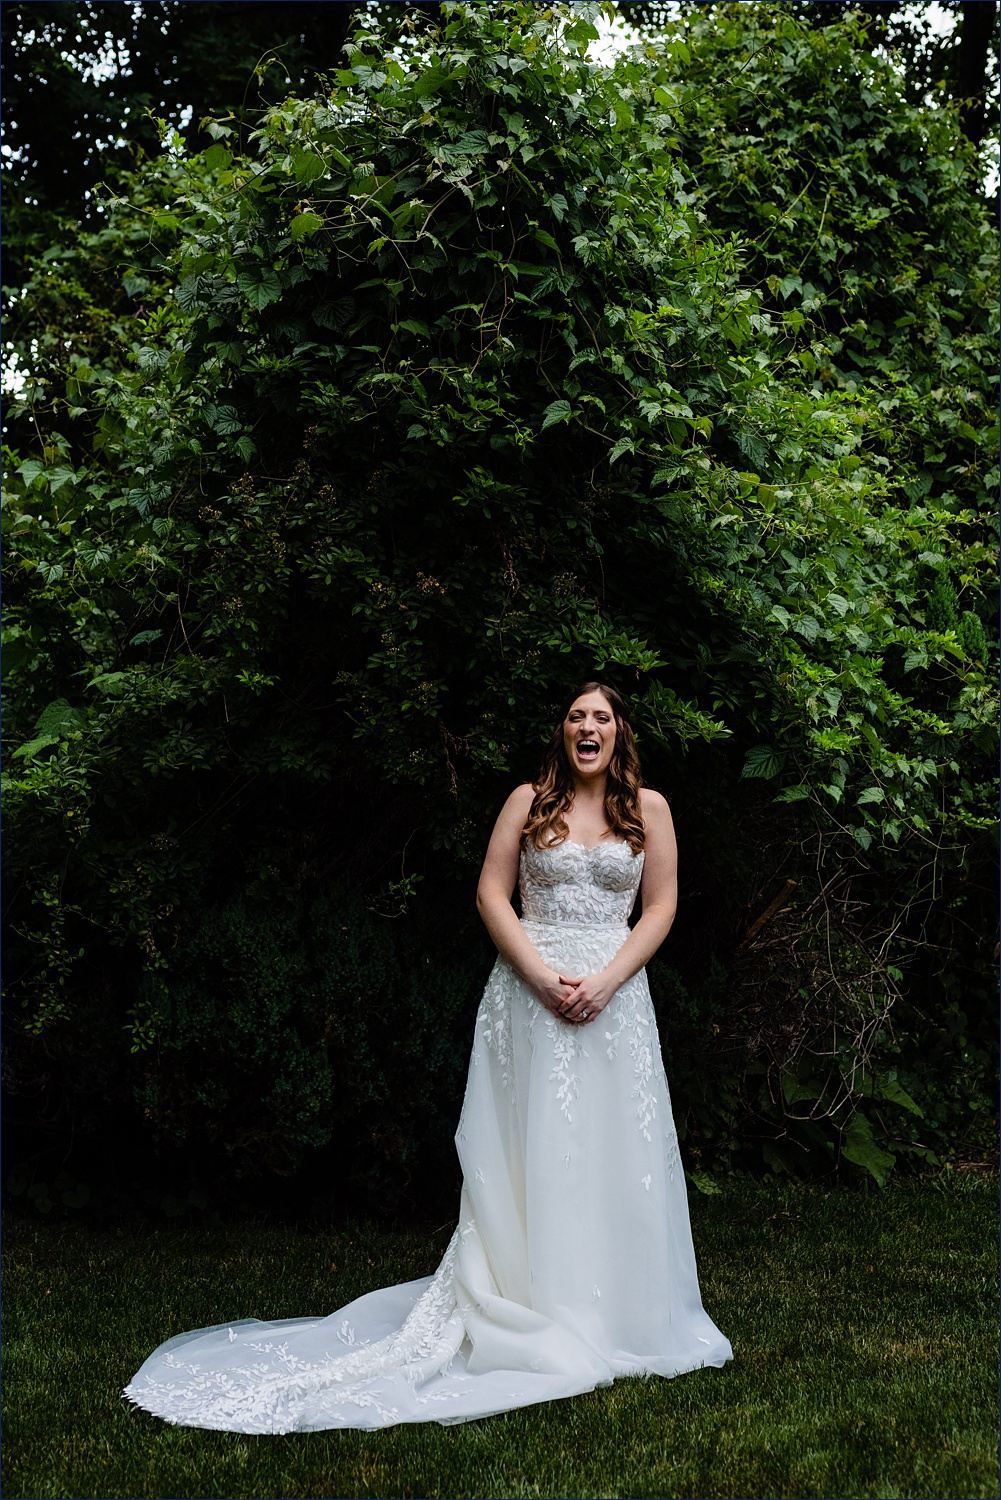 A beaming bride on her wedding day among the gorgeous greenery in the family backyard